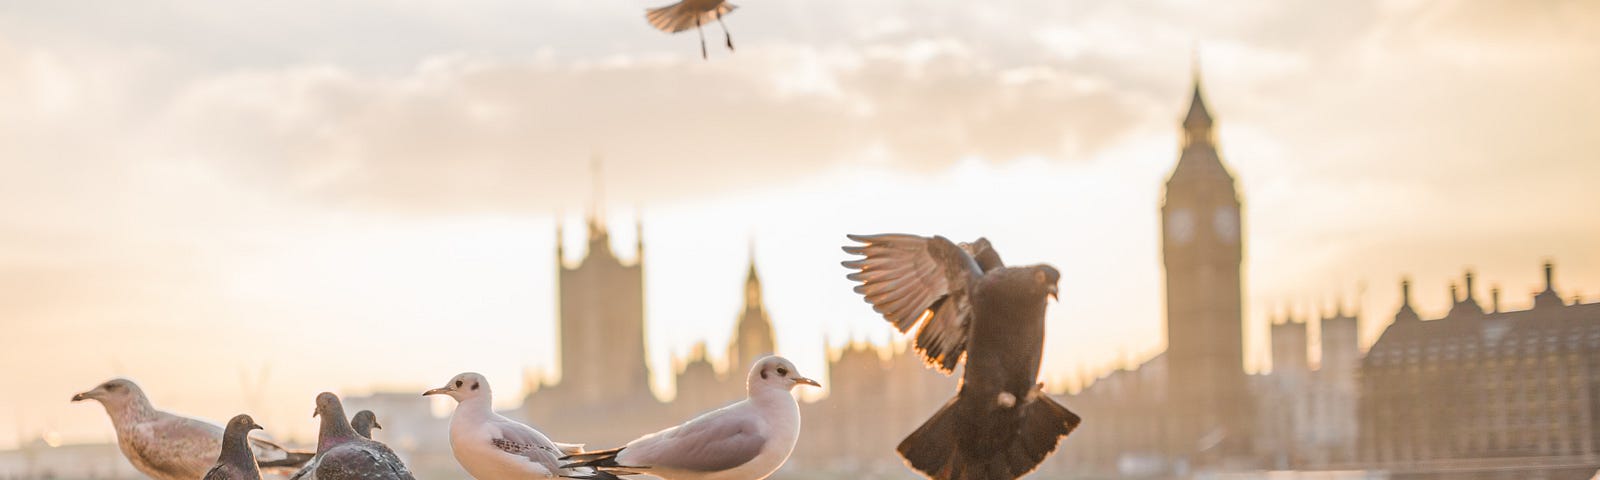 Pigeons standing and flying around on a concrete bridge in forefront. Big Ben in London in the background.